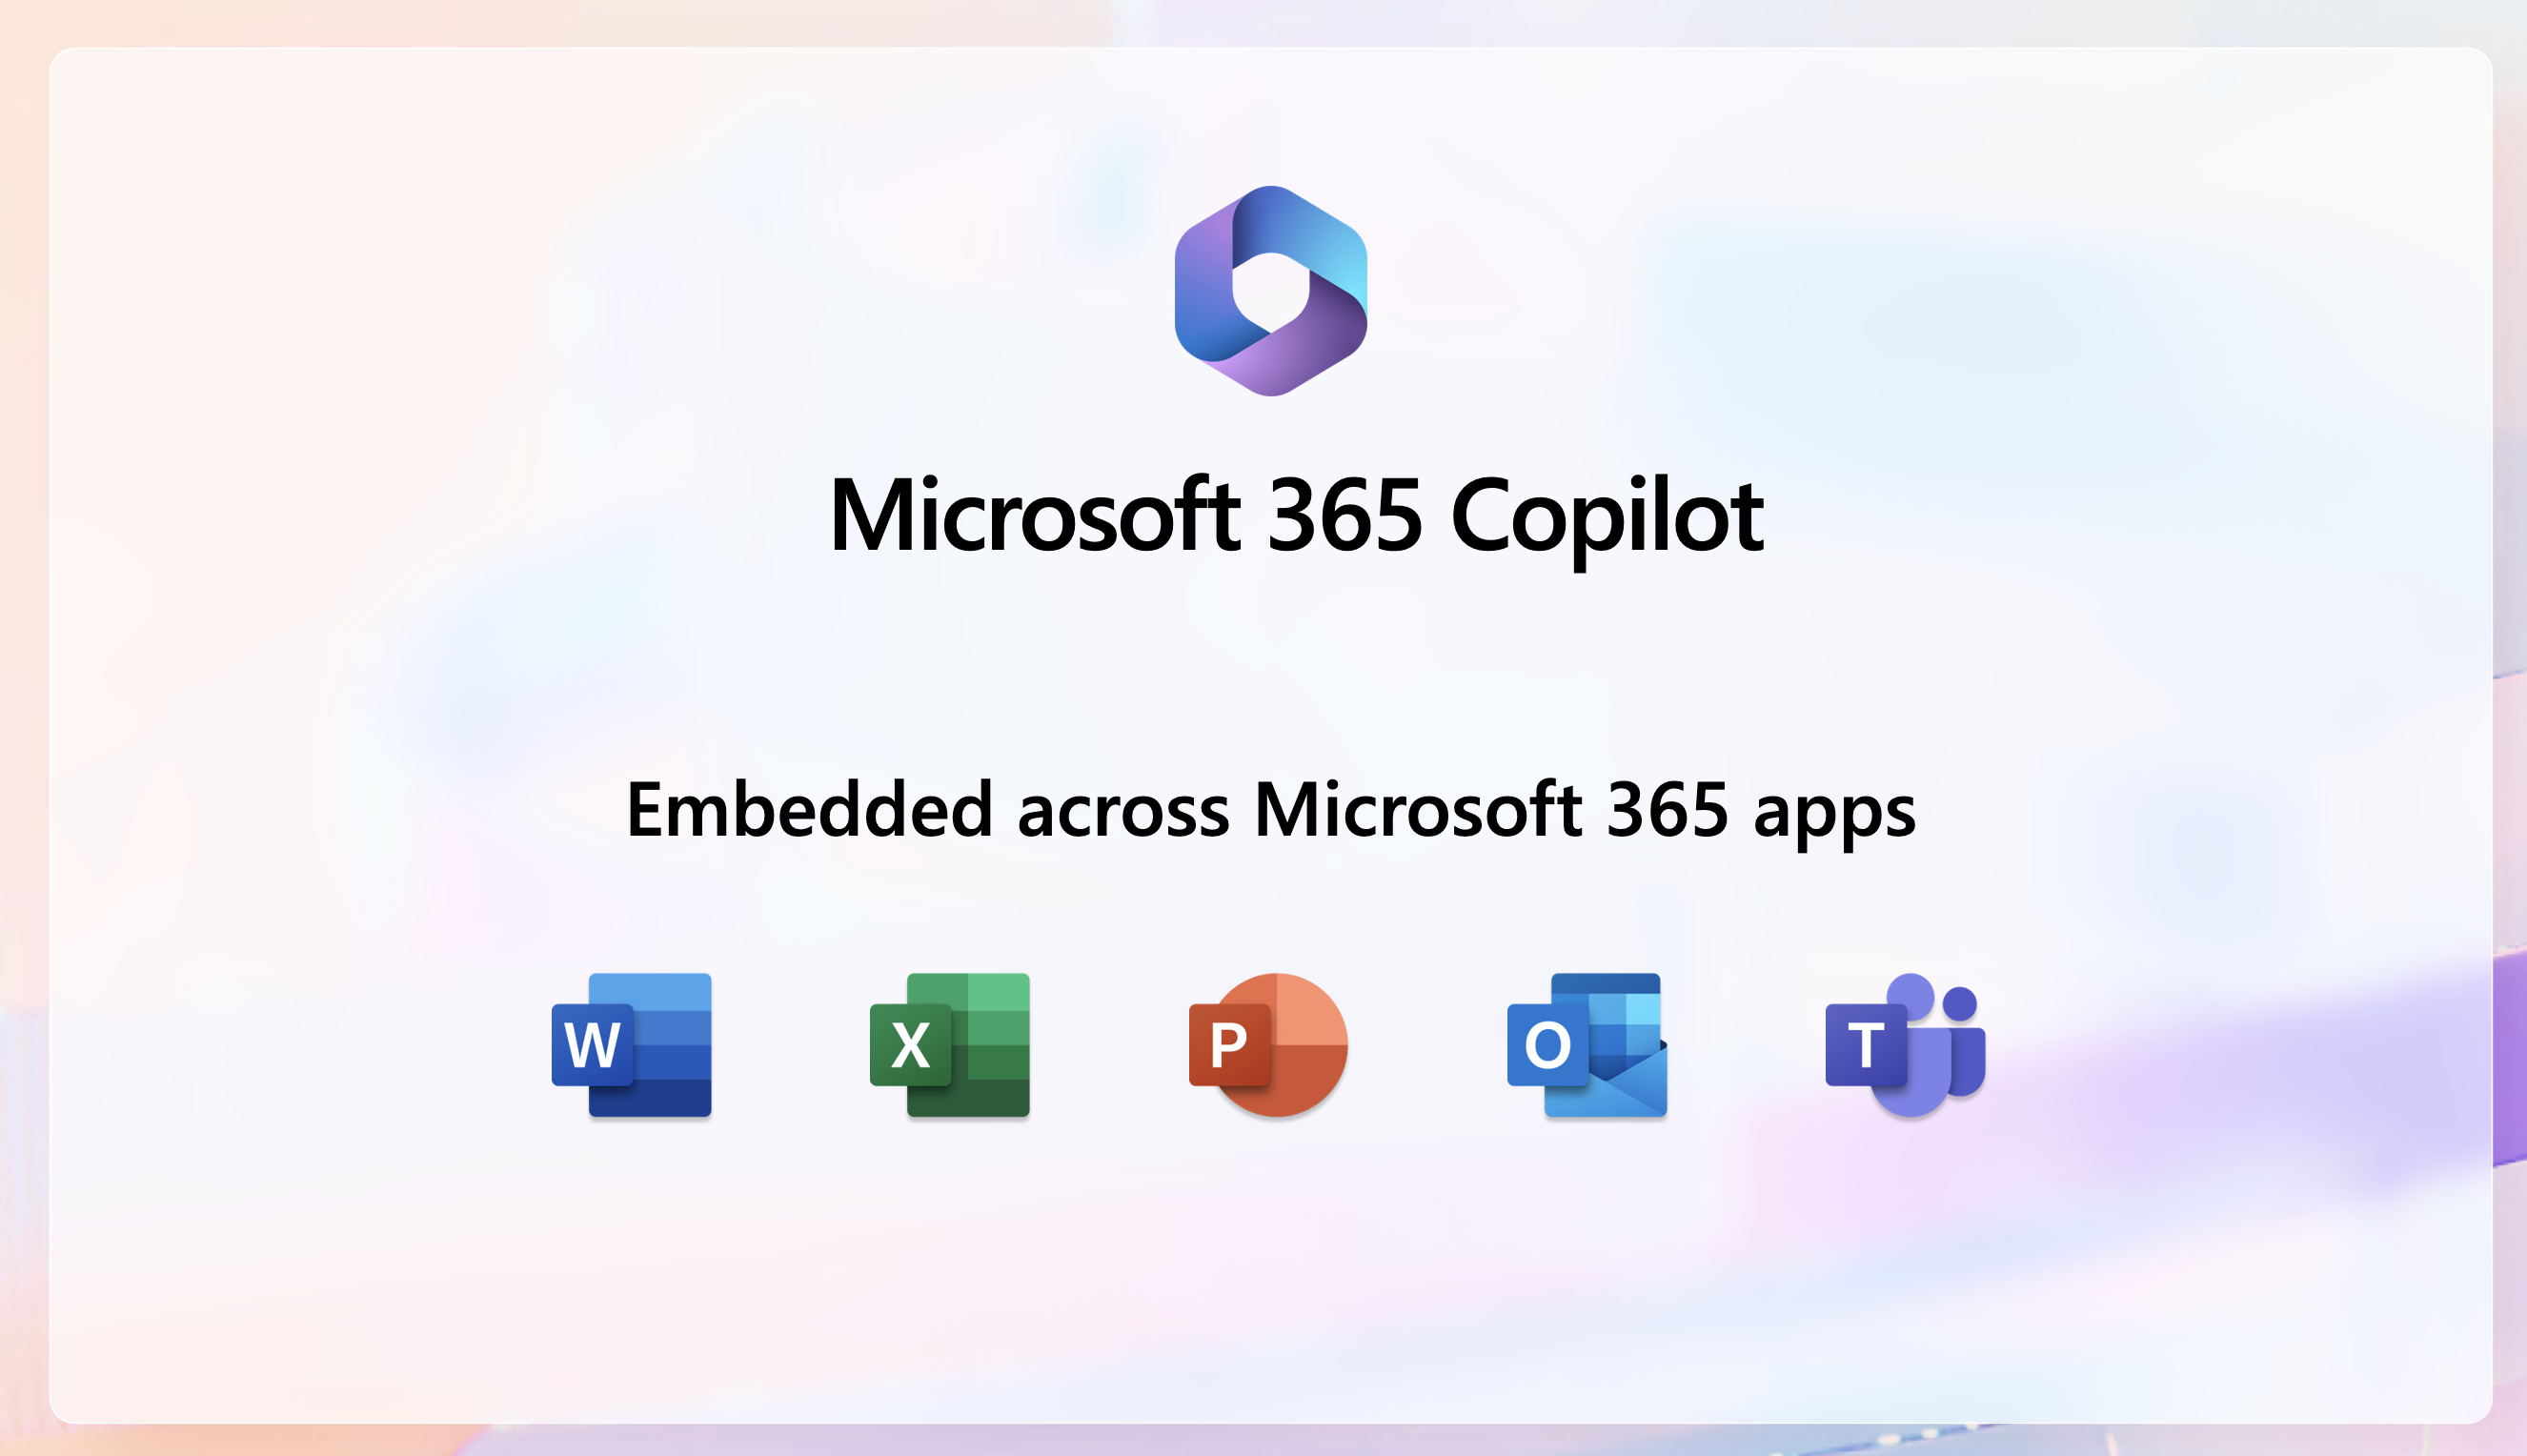 Picture of Microsoft 365 Copilot being embedded across the different Microsoft 365 apps